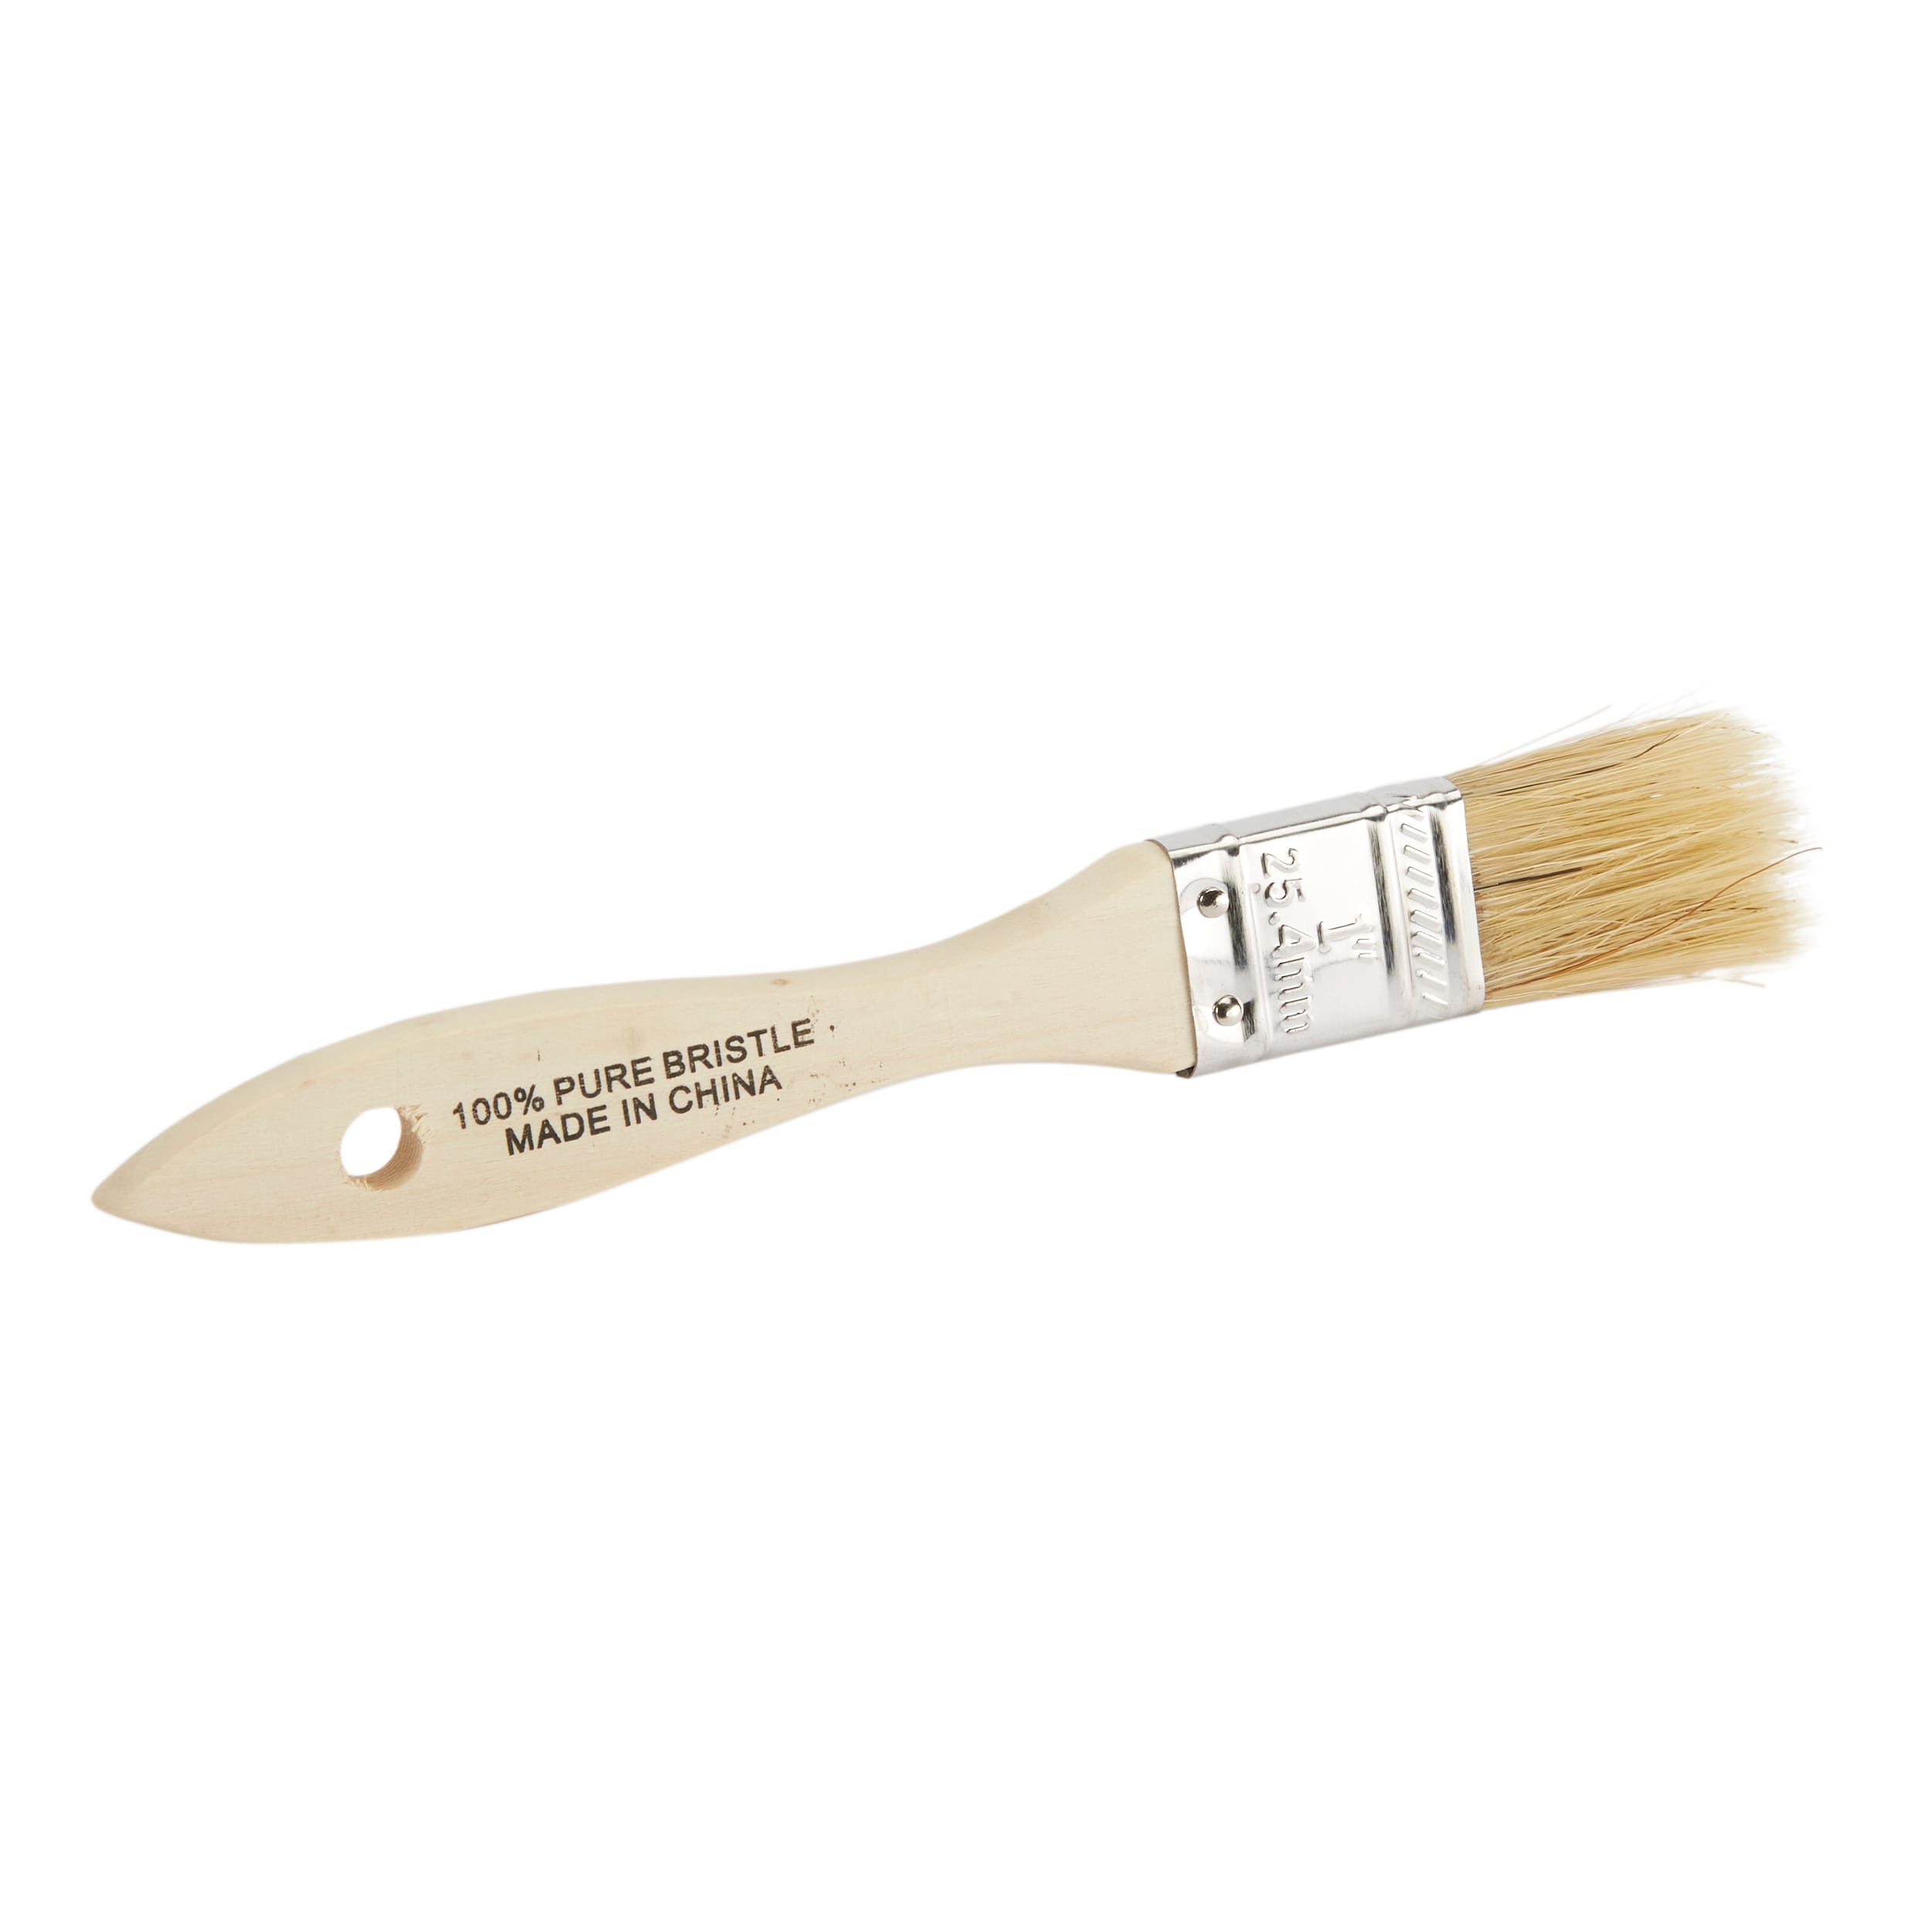 Project Source 1-in Reusable Natural Bristle Flat Paint Brush (Chip Brush)  at